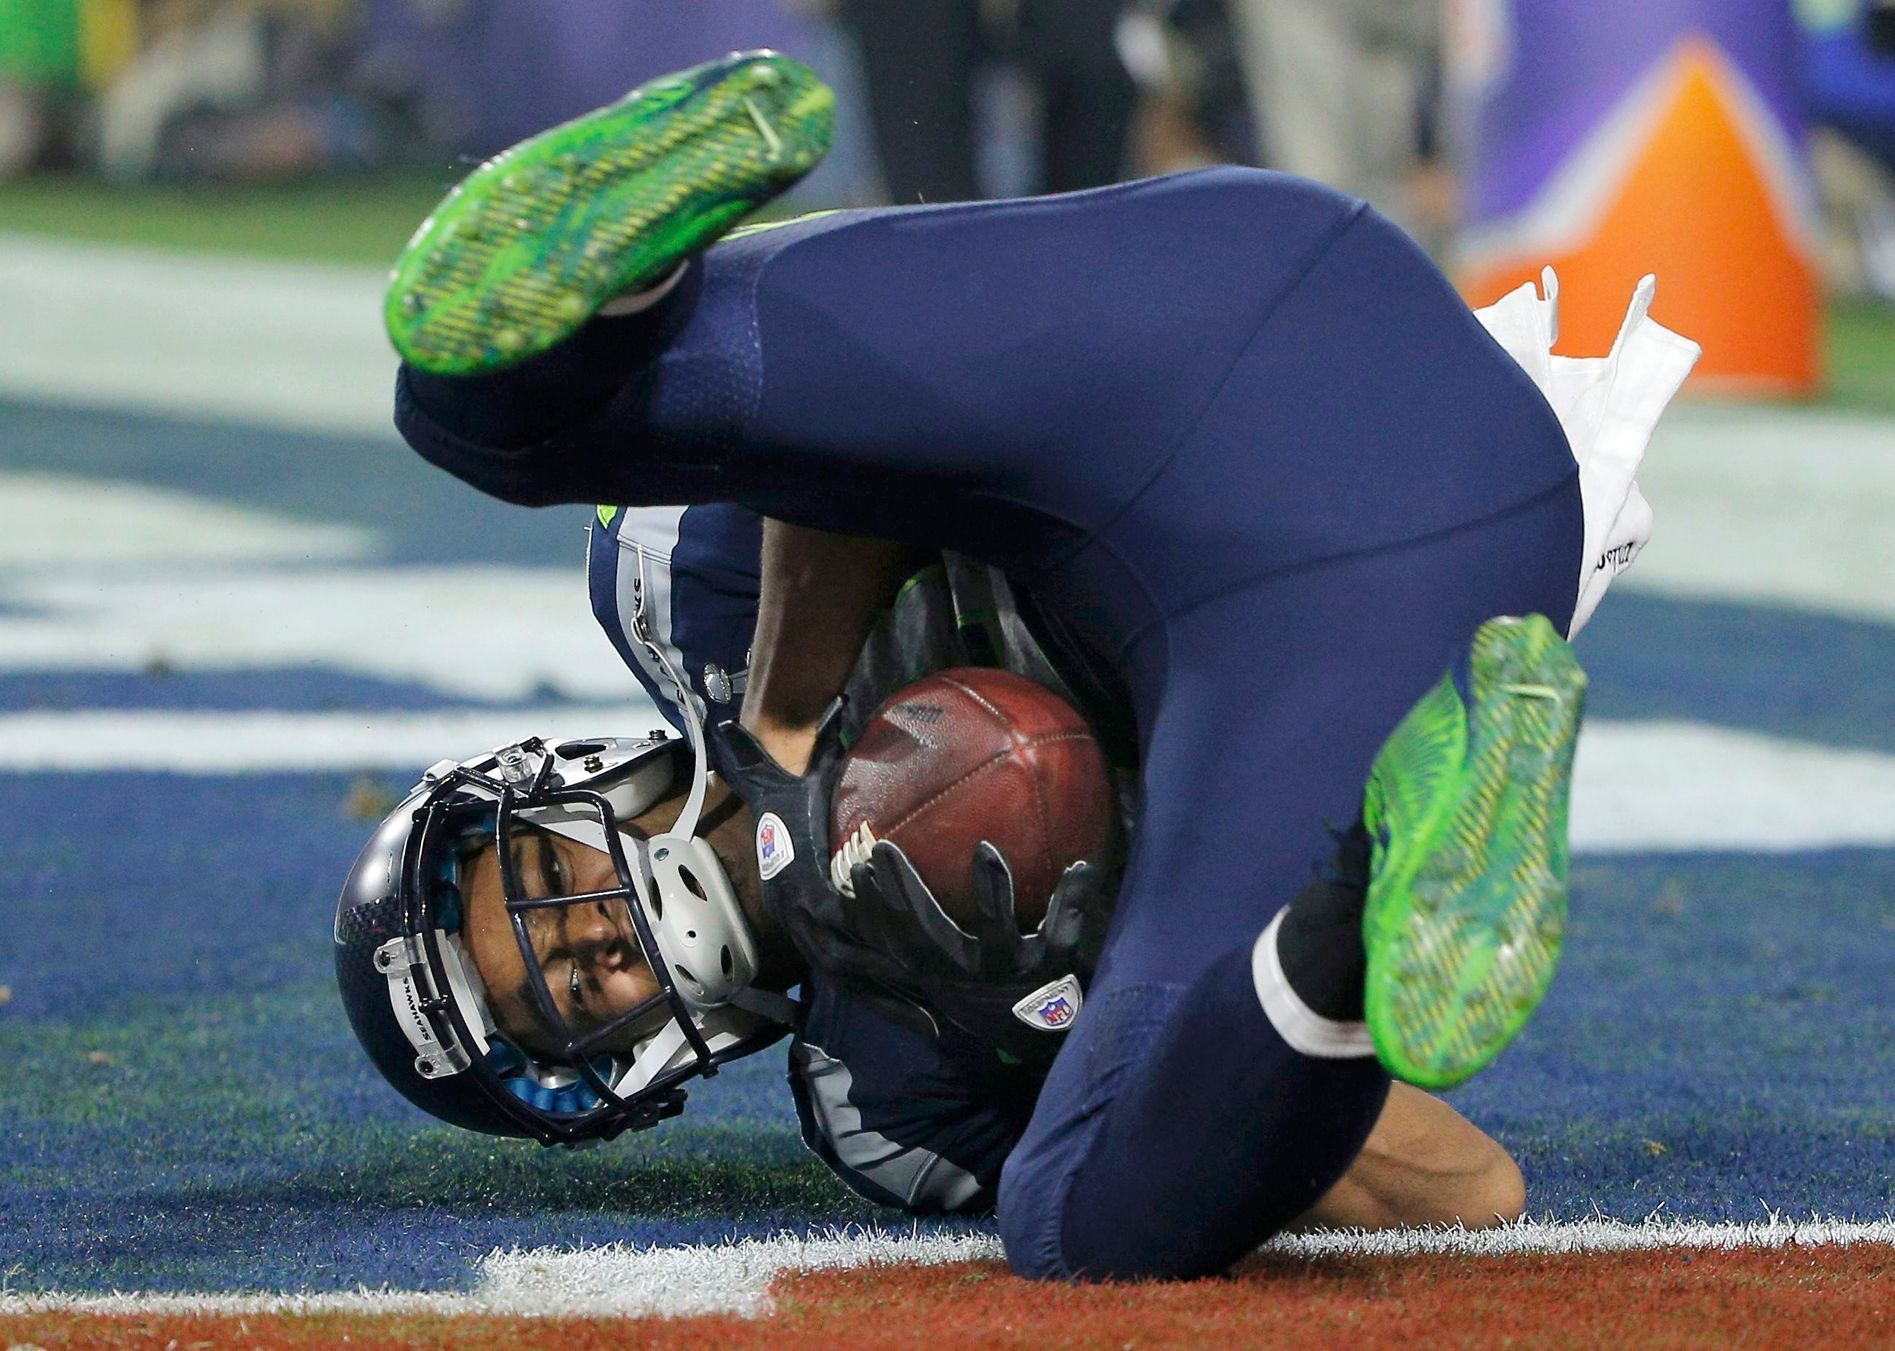 Seattle Seahawks wide receiver Doug Baldwin catches a third quarter touchdown pass against the New England Patriots during the NFL Super Bowl XLIX football game in Glendale